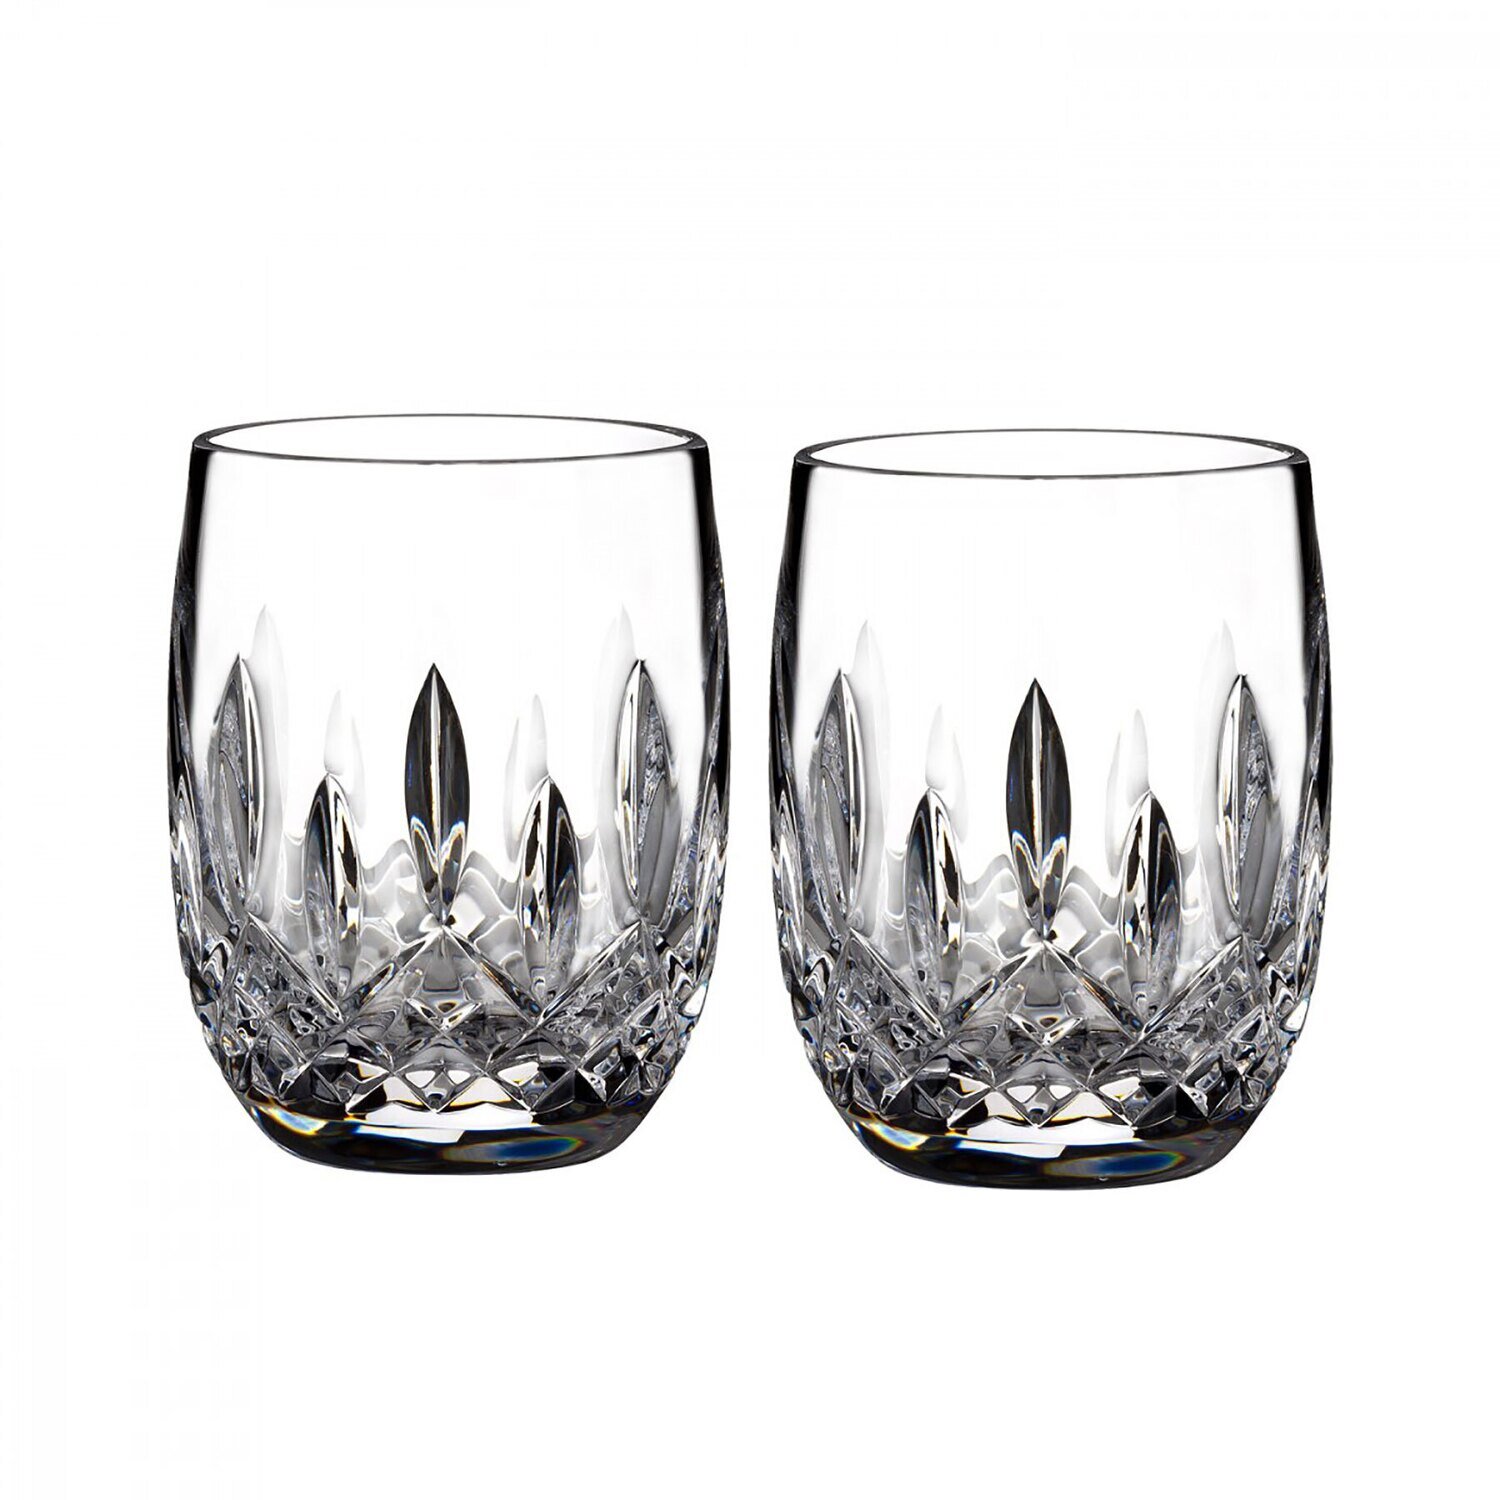 Waterford Lismore Connoisseur Tumbler Rounded 7 Oz Set of 2 40003434